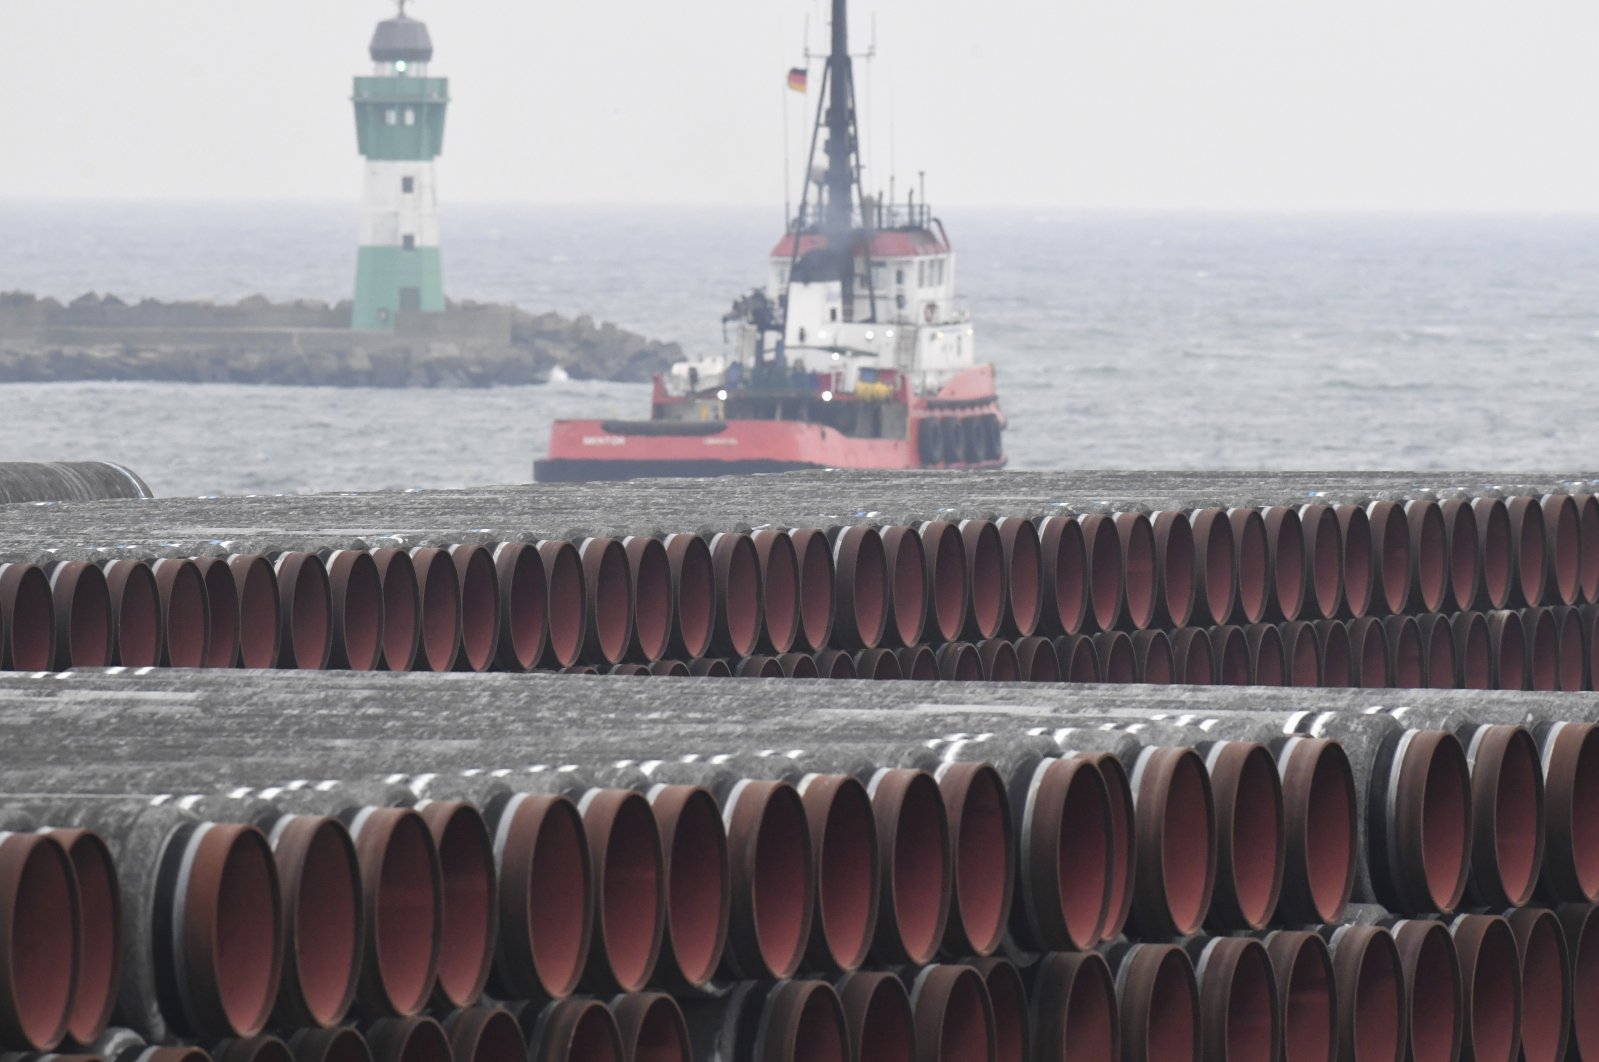 Pipes for the Nord Stream 2 Baltic Sea gas pipeline are stored on the premises of the port of Mukran near Sassnitz, Germany, Dec. 4, 2020. (DPA via AP)